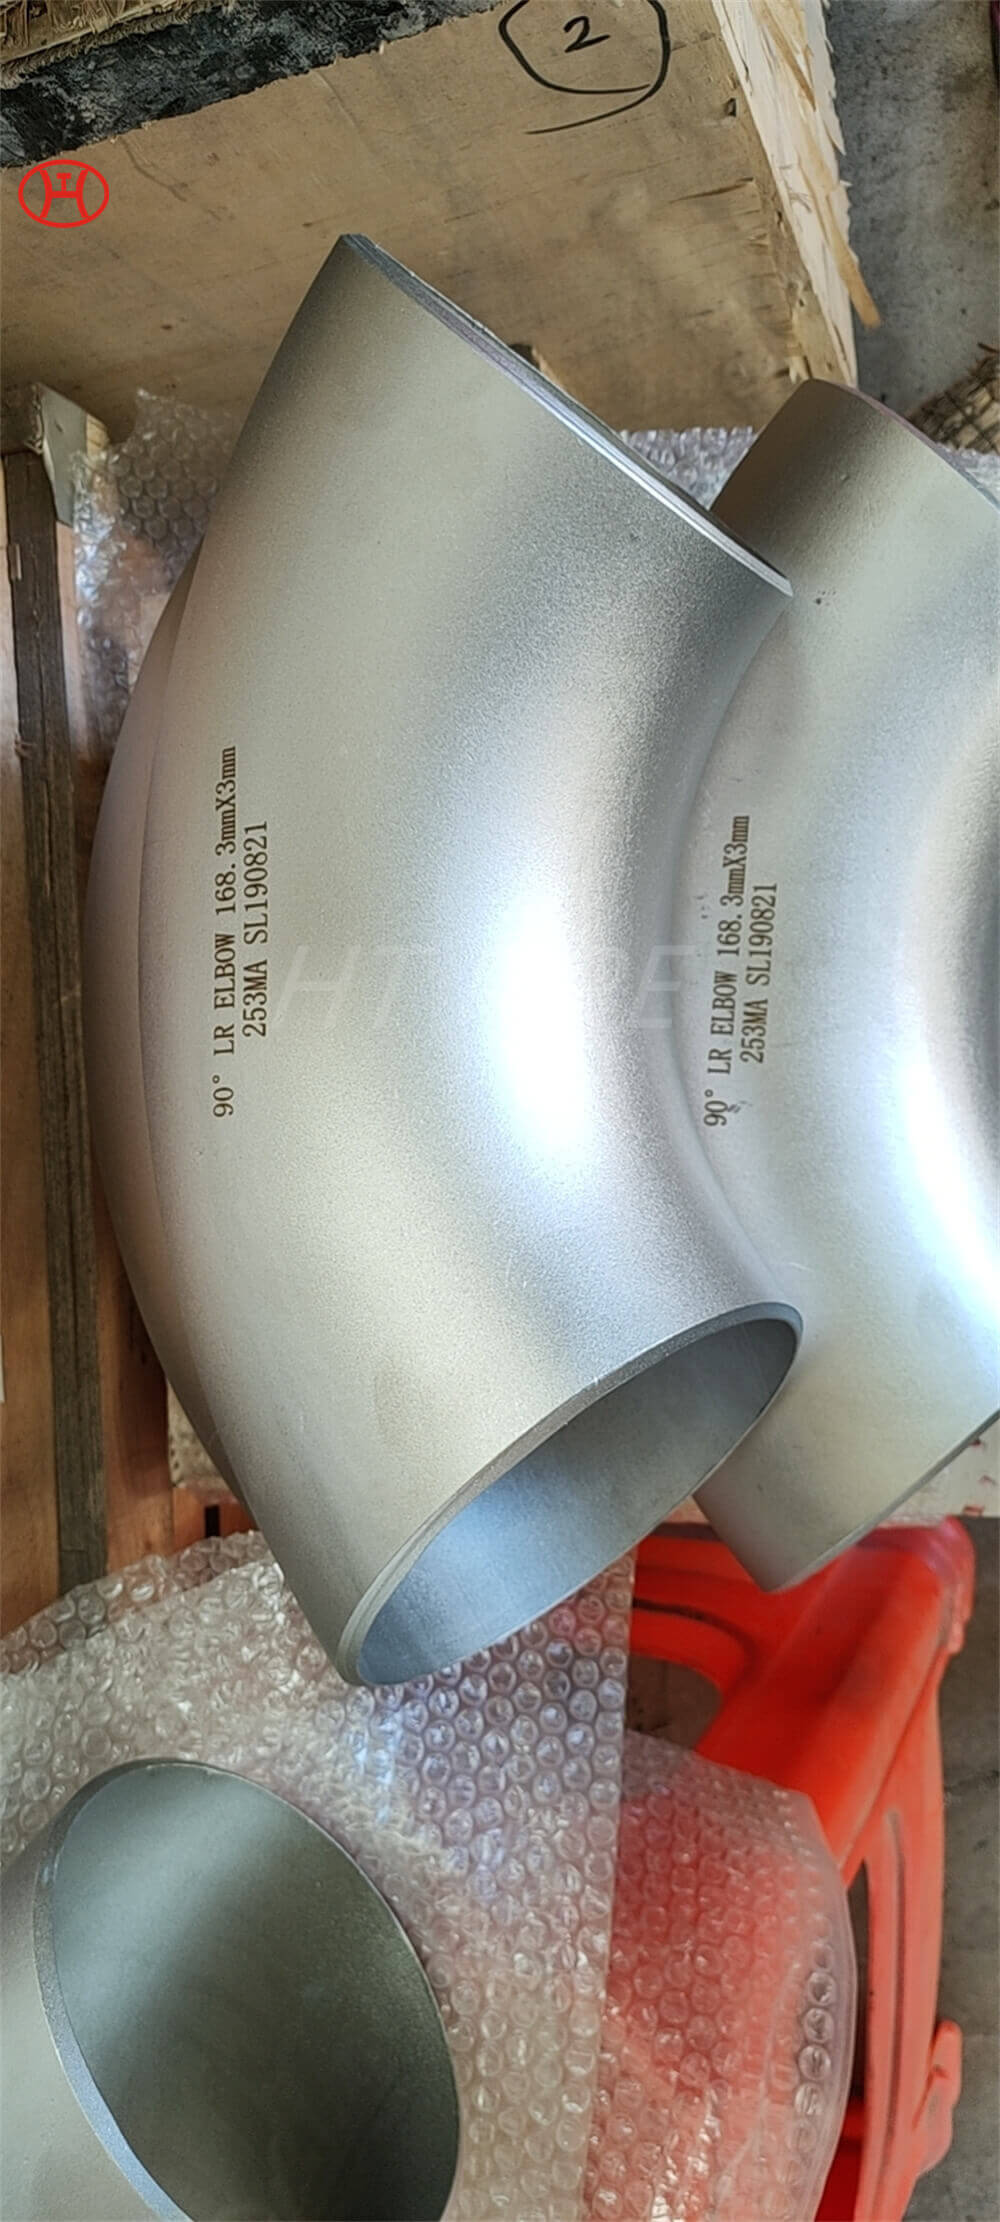 ASTM A815 WP446 pipe fittings elbows